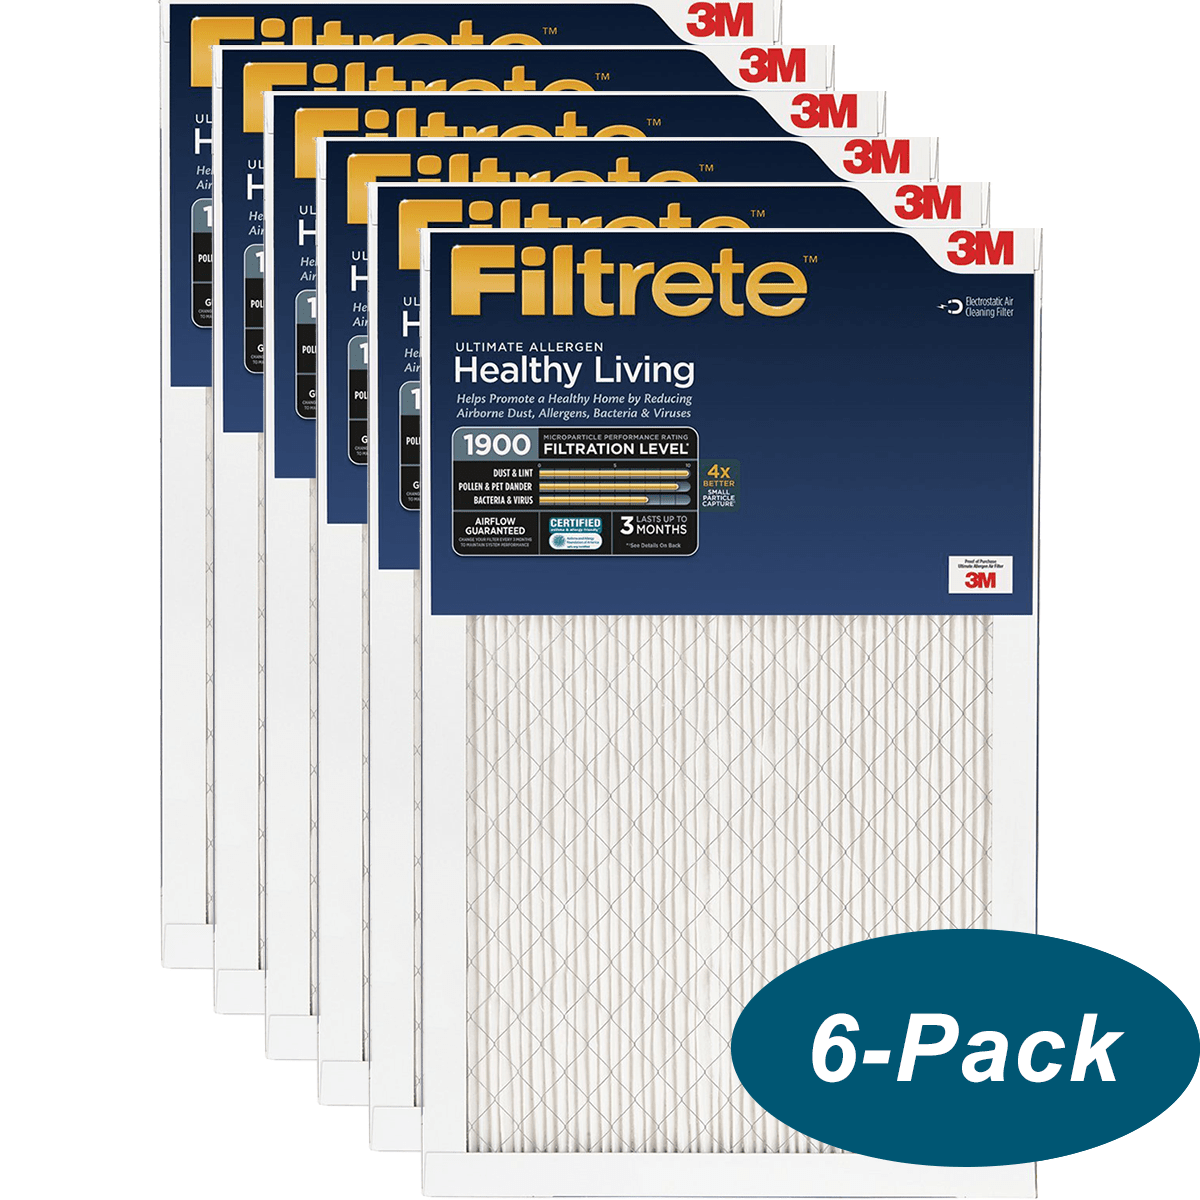 Image of 3m Filtrete Ultimate Allergen Reduction Filter 16x25x1 6-pack